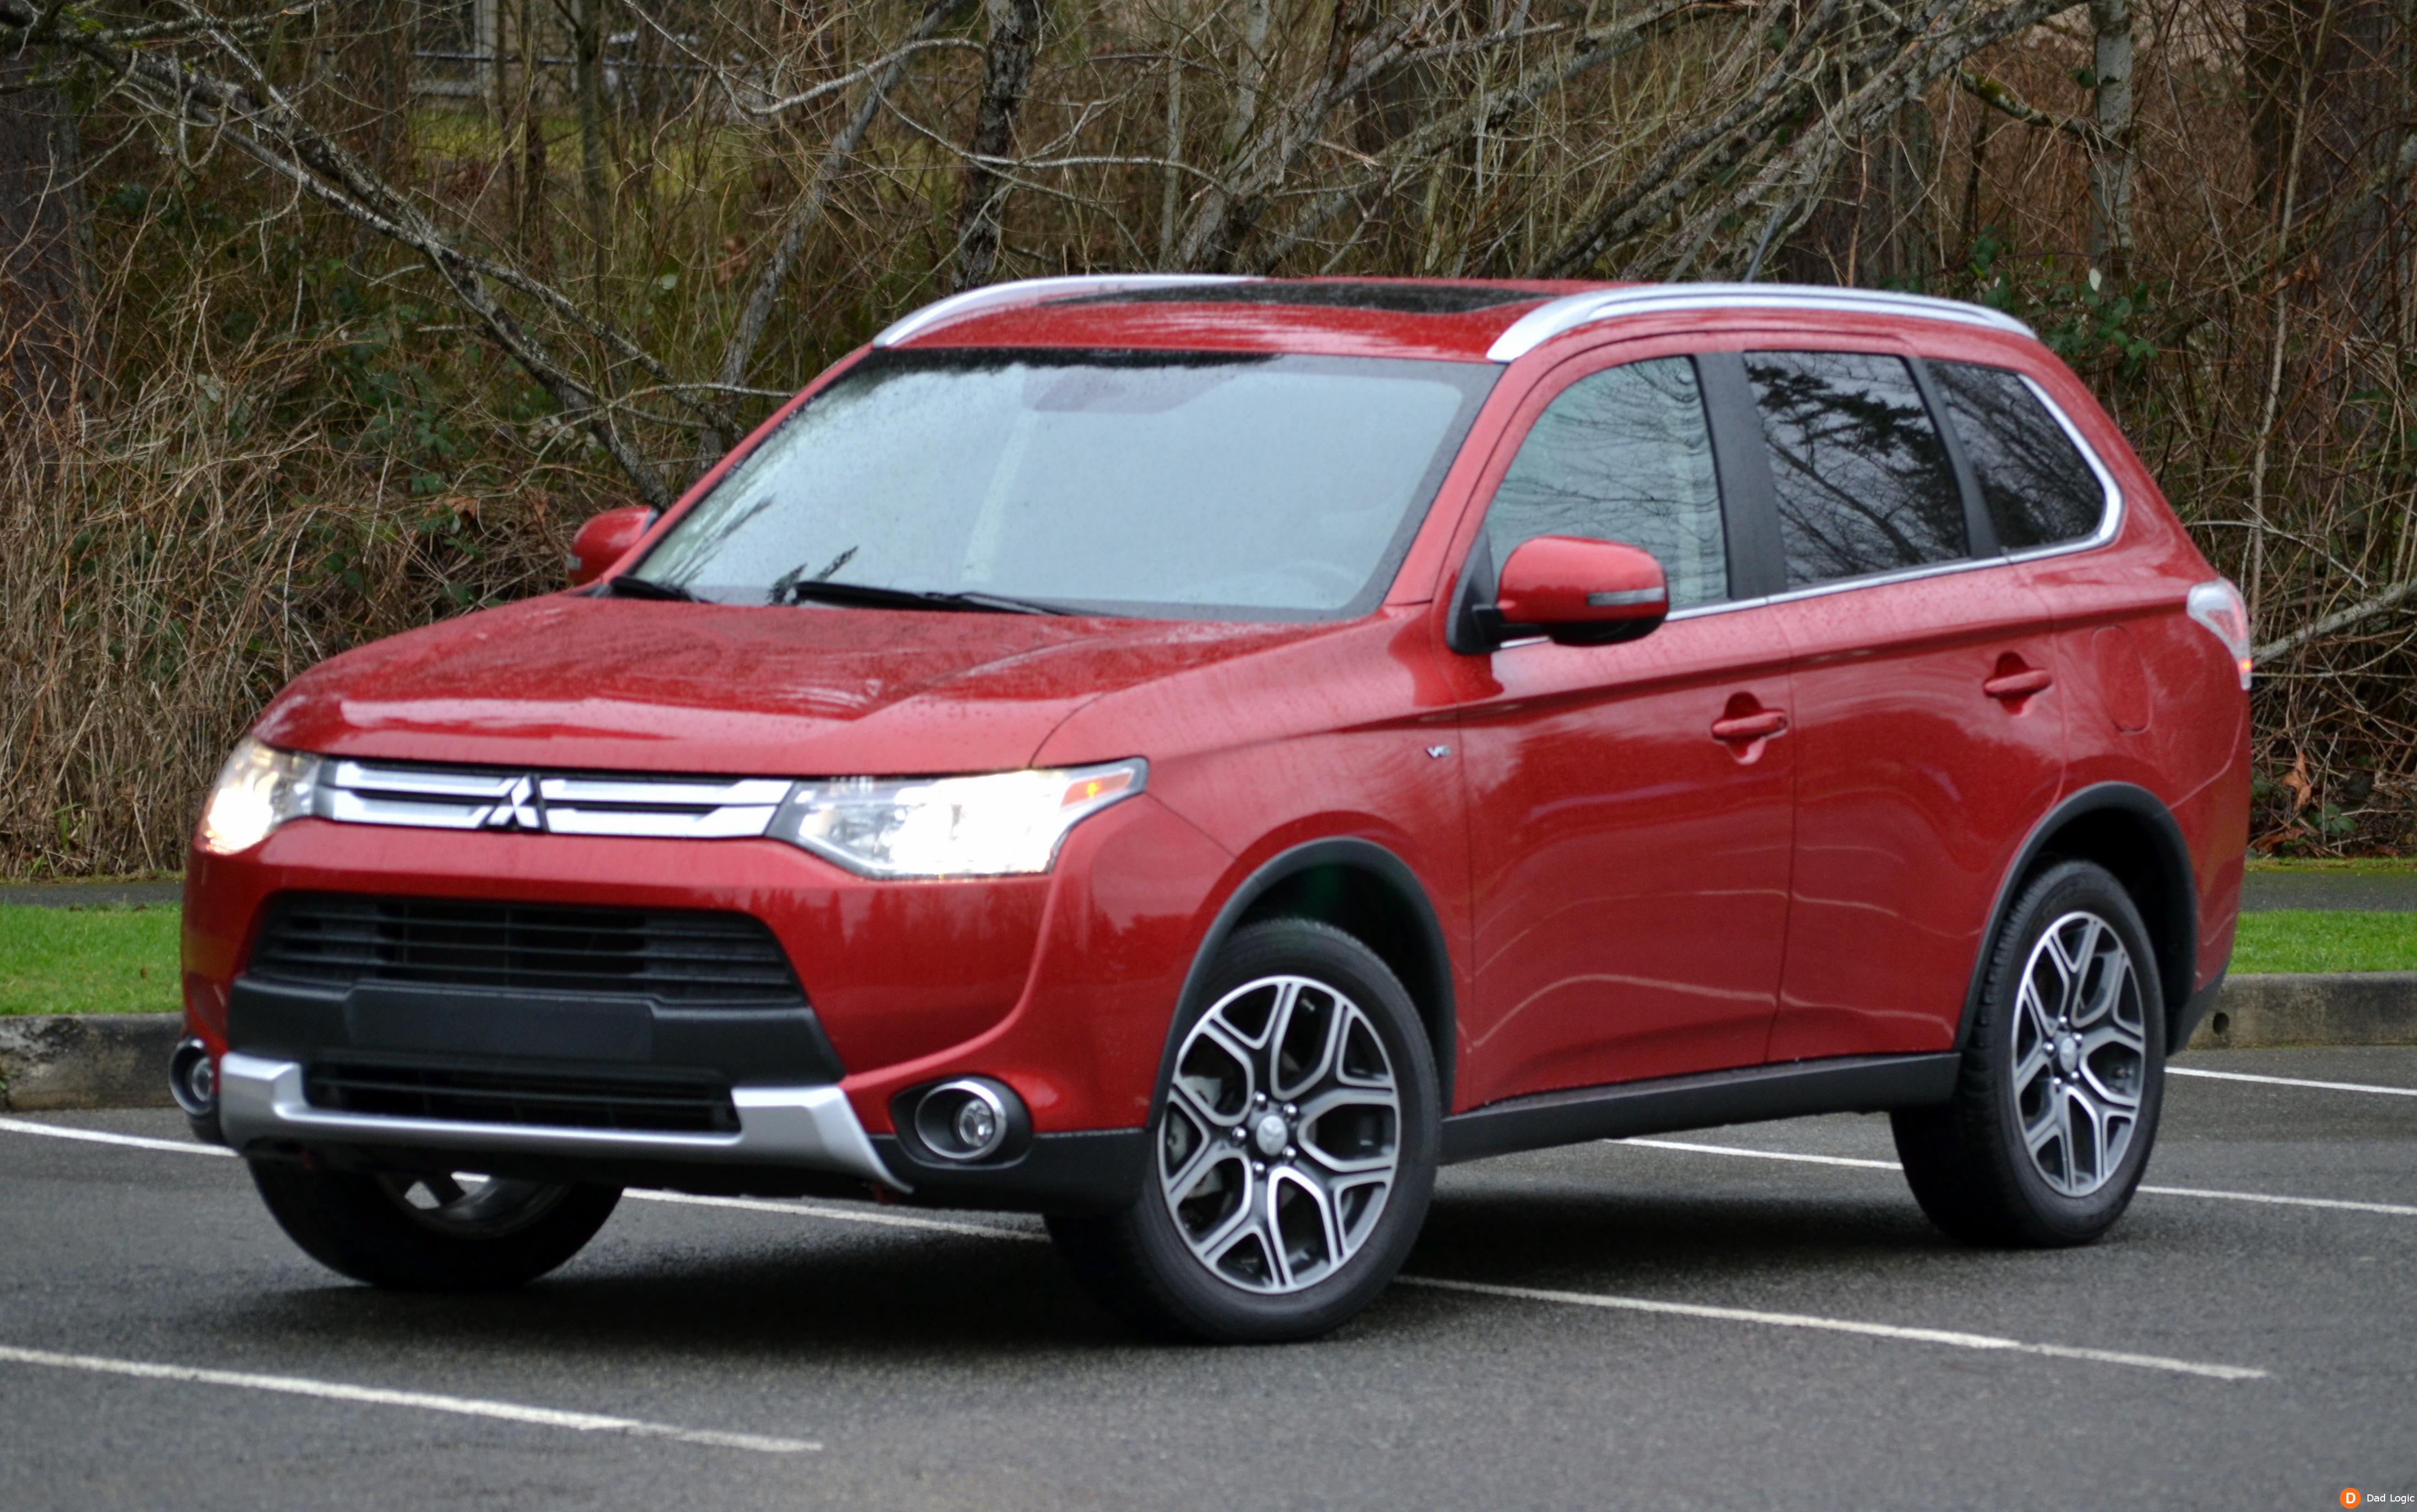 The 2015 Mitsubishi Outlander has a Powerful Engine and Plenty of Safety  for your Family Adventures - Dad Logic